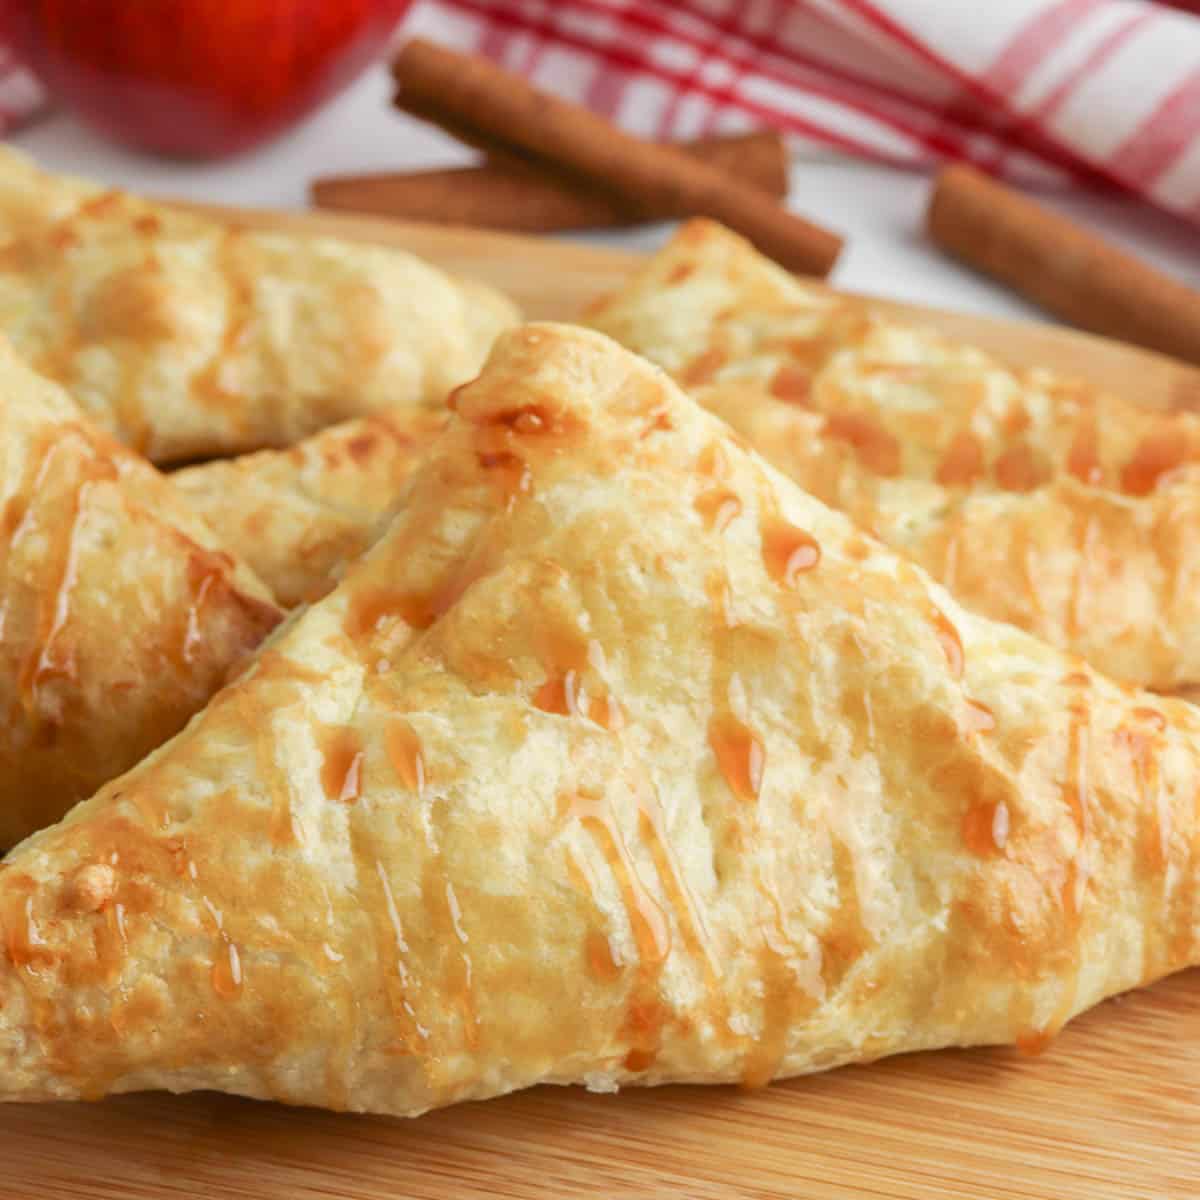 https://www.tosimplyinspire.com/wp-content/uploads/2022/07/Apple-Puff-Pastry-Turnovers-1200.jpg